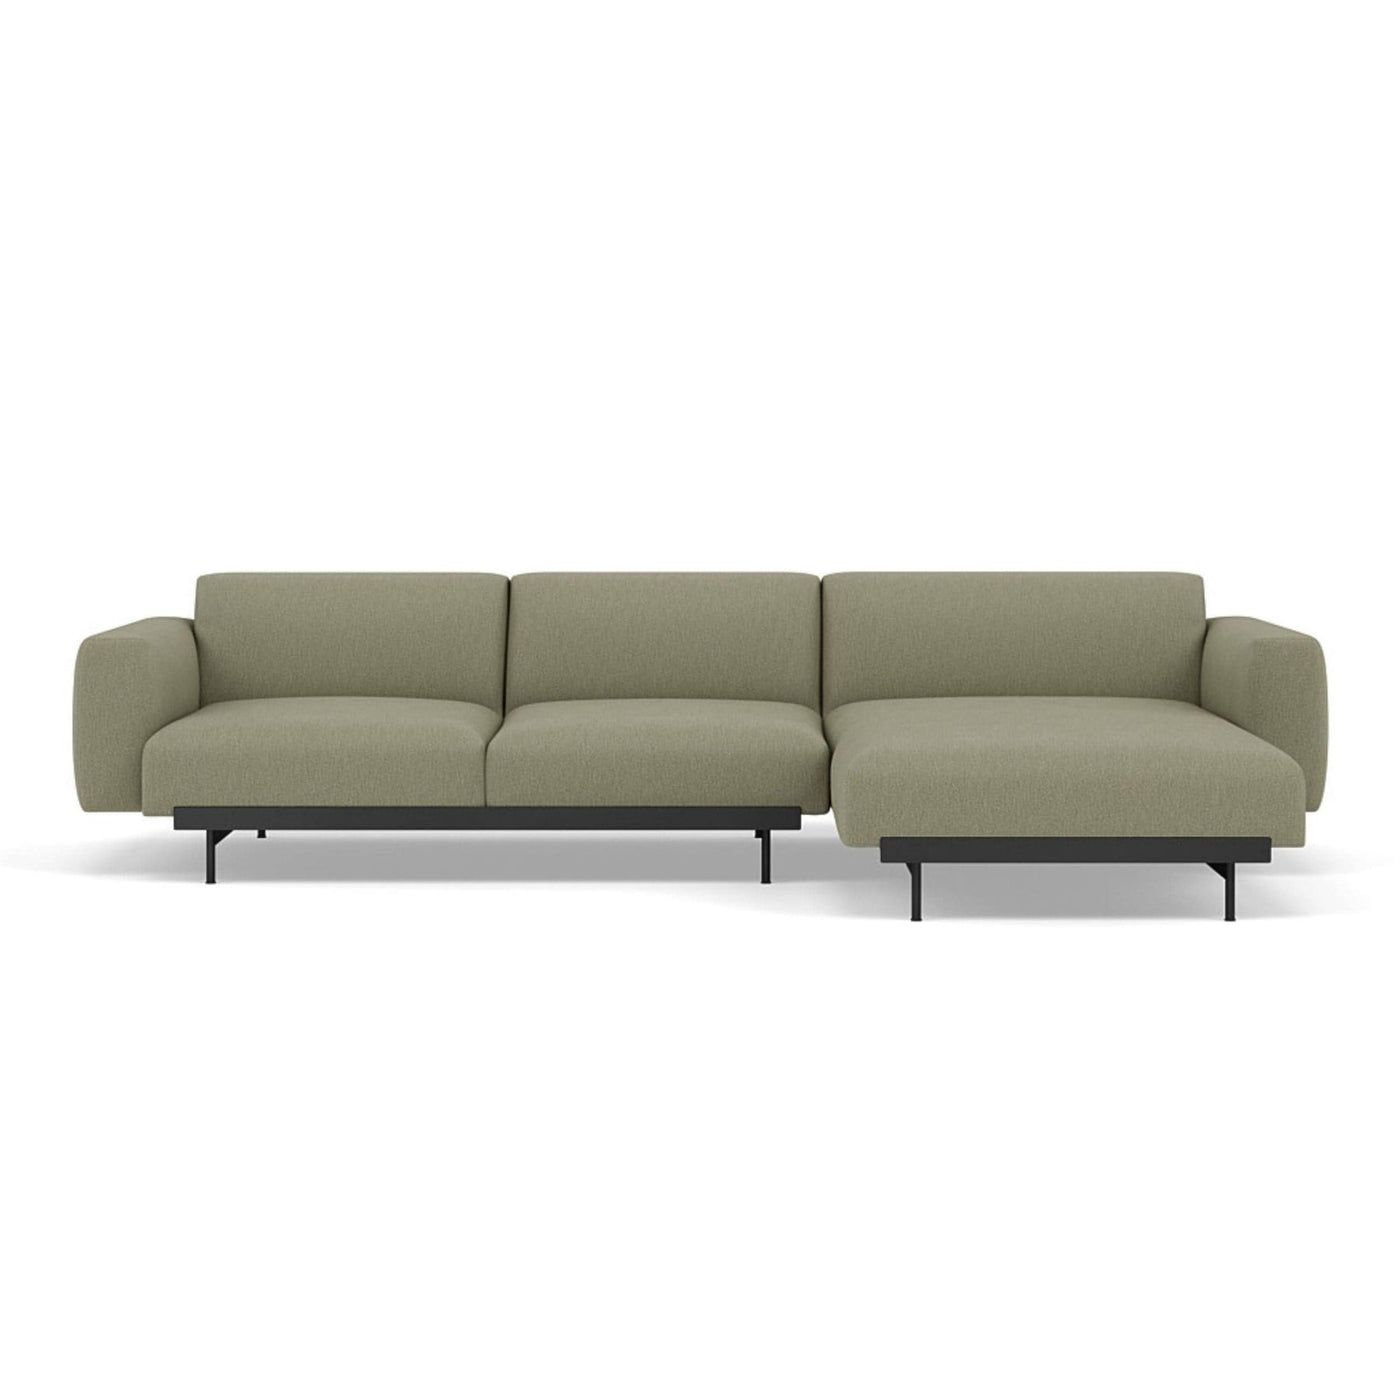 Muuto In Situ Sofa 3 seater configuration 6 in clay 15 fabric. Made to order at someday designs. #colour_clay-15